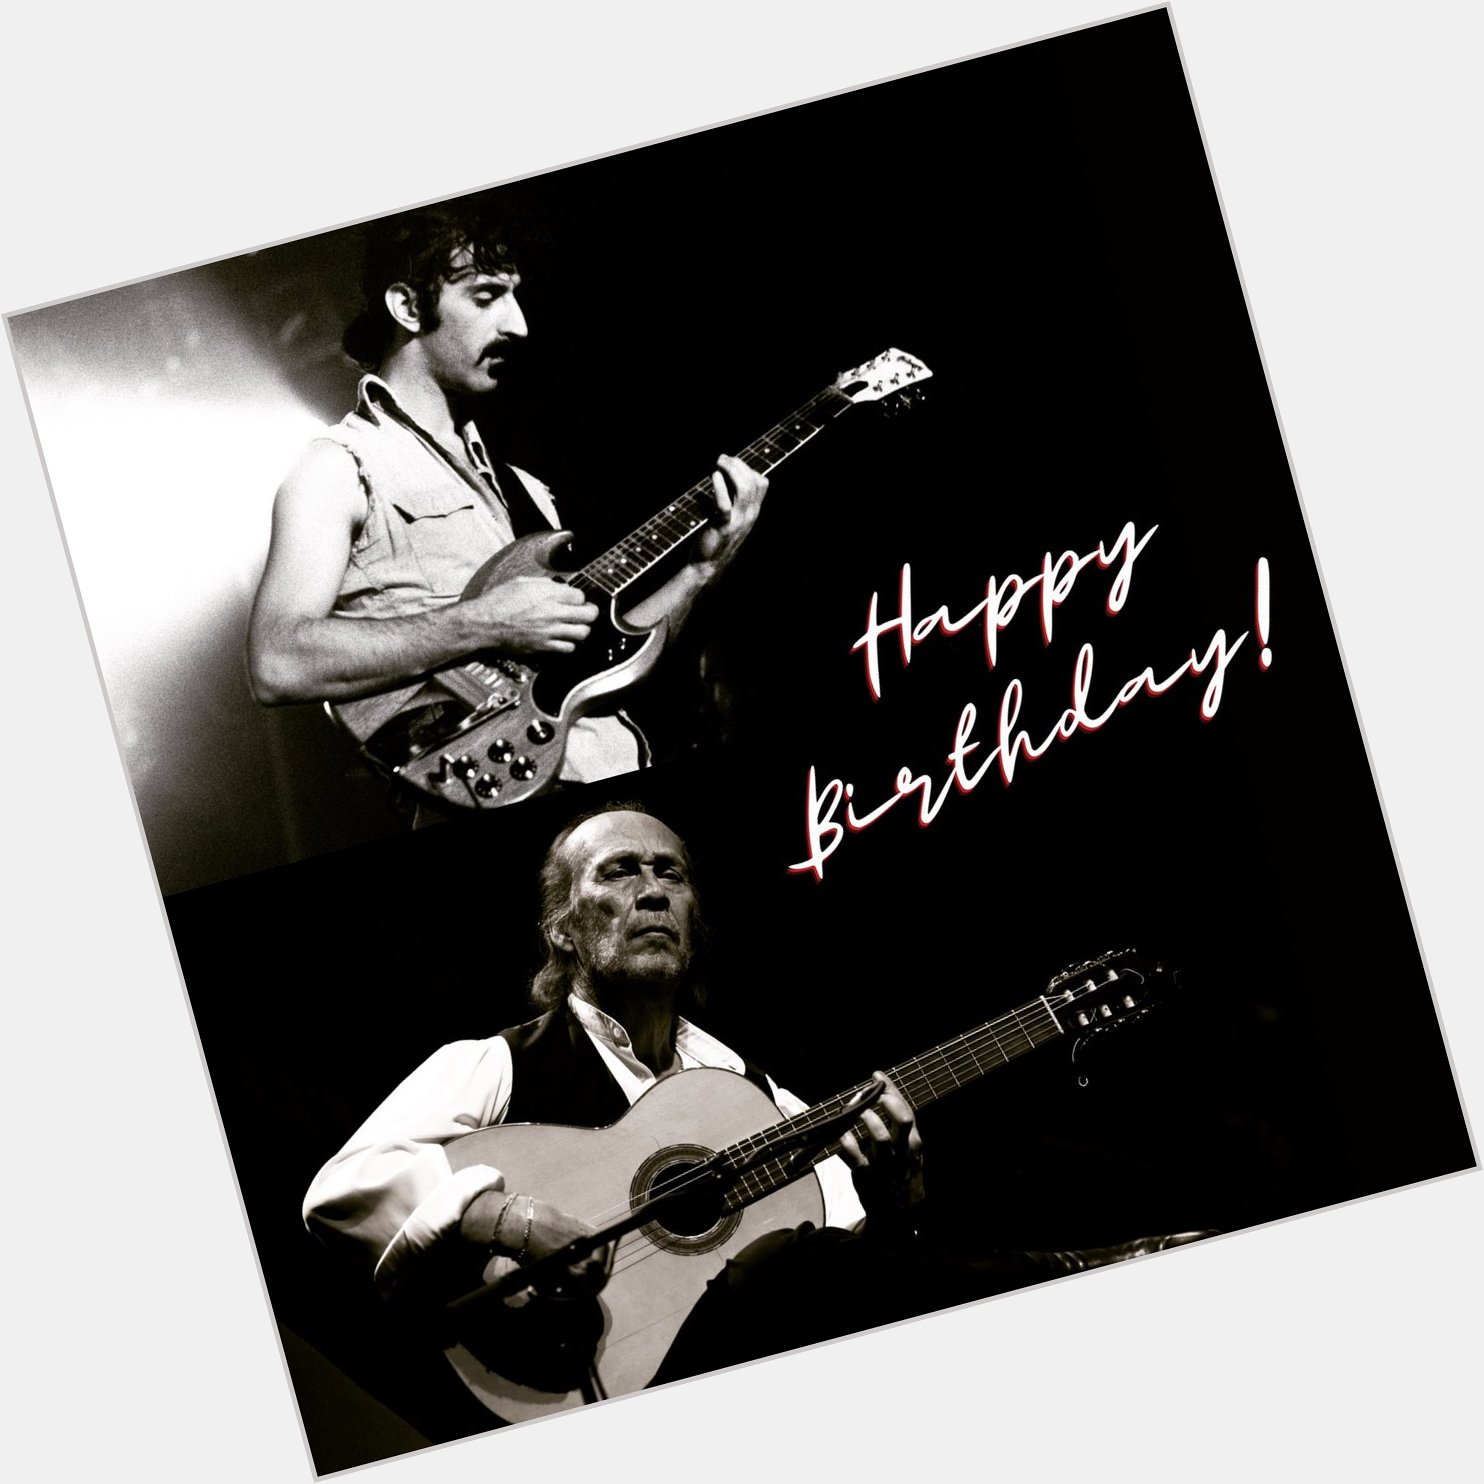 Happy birthday to both of these incredible musicians, Frank Zappa & Paco de Lucía! 